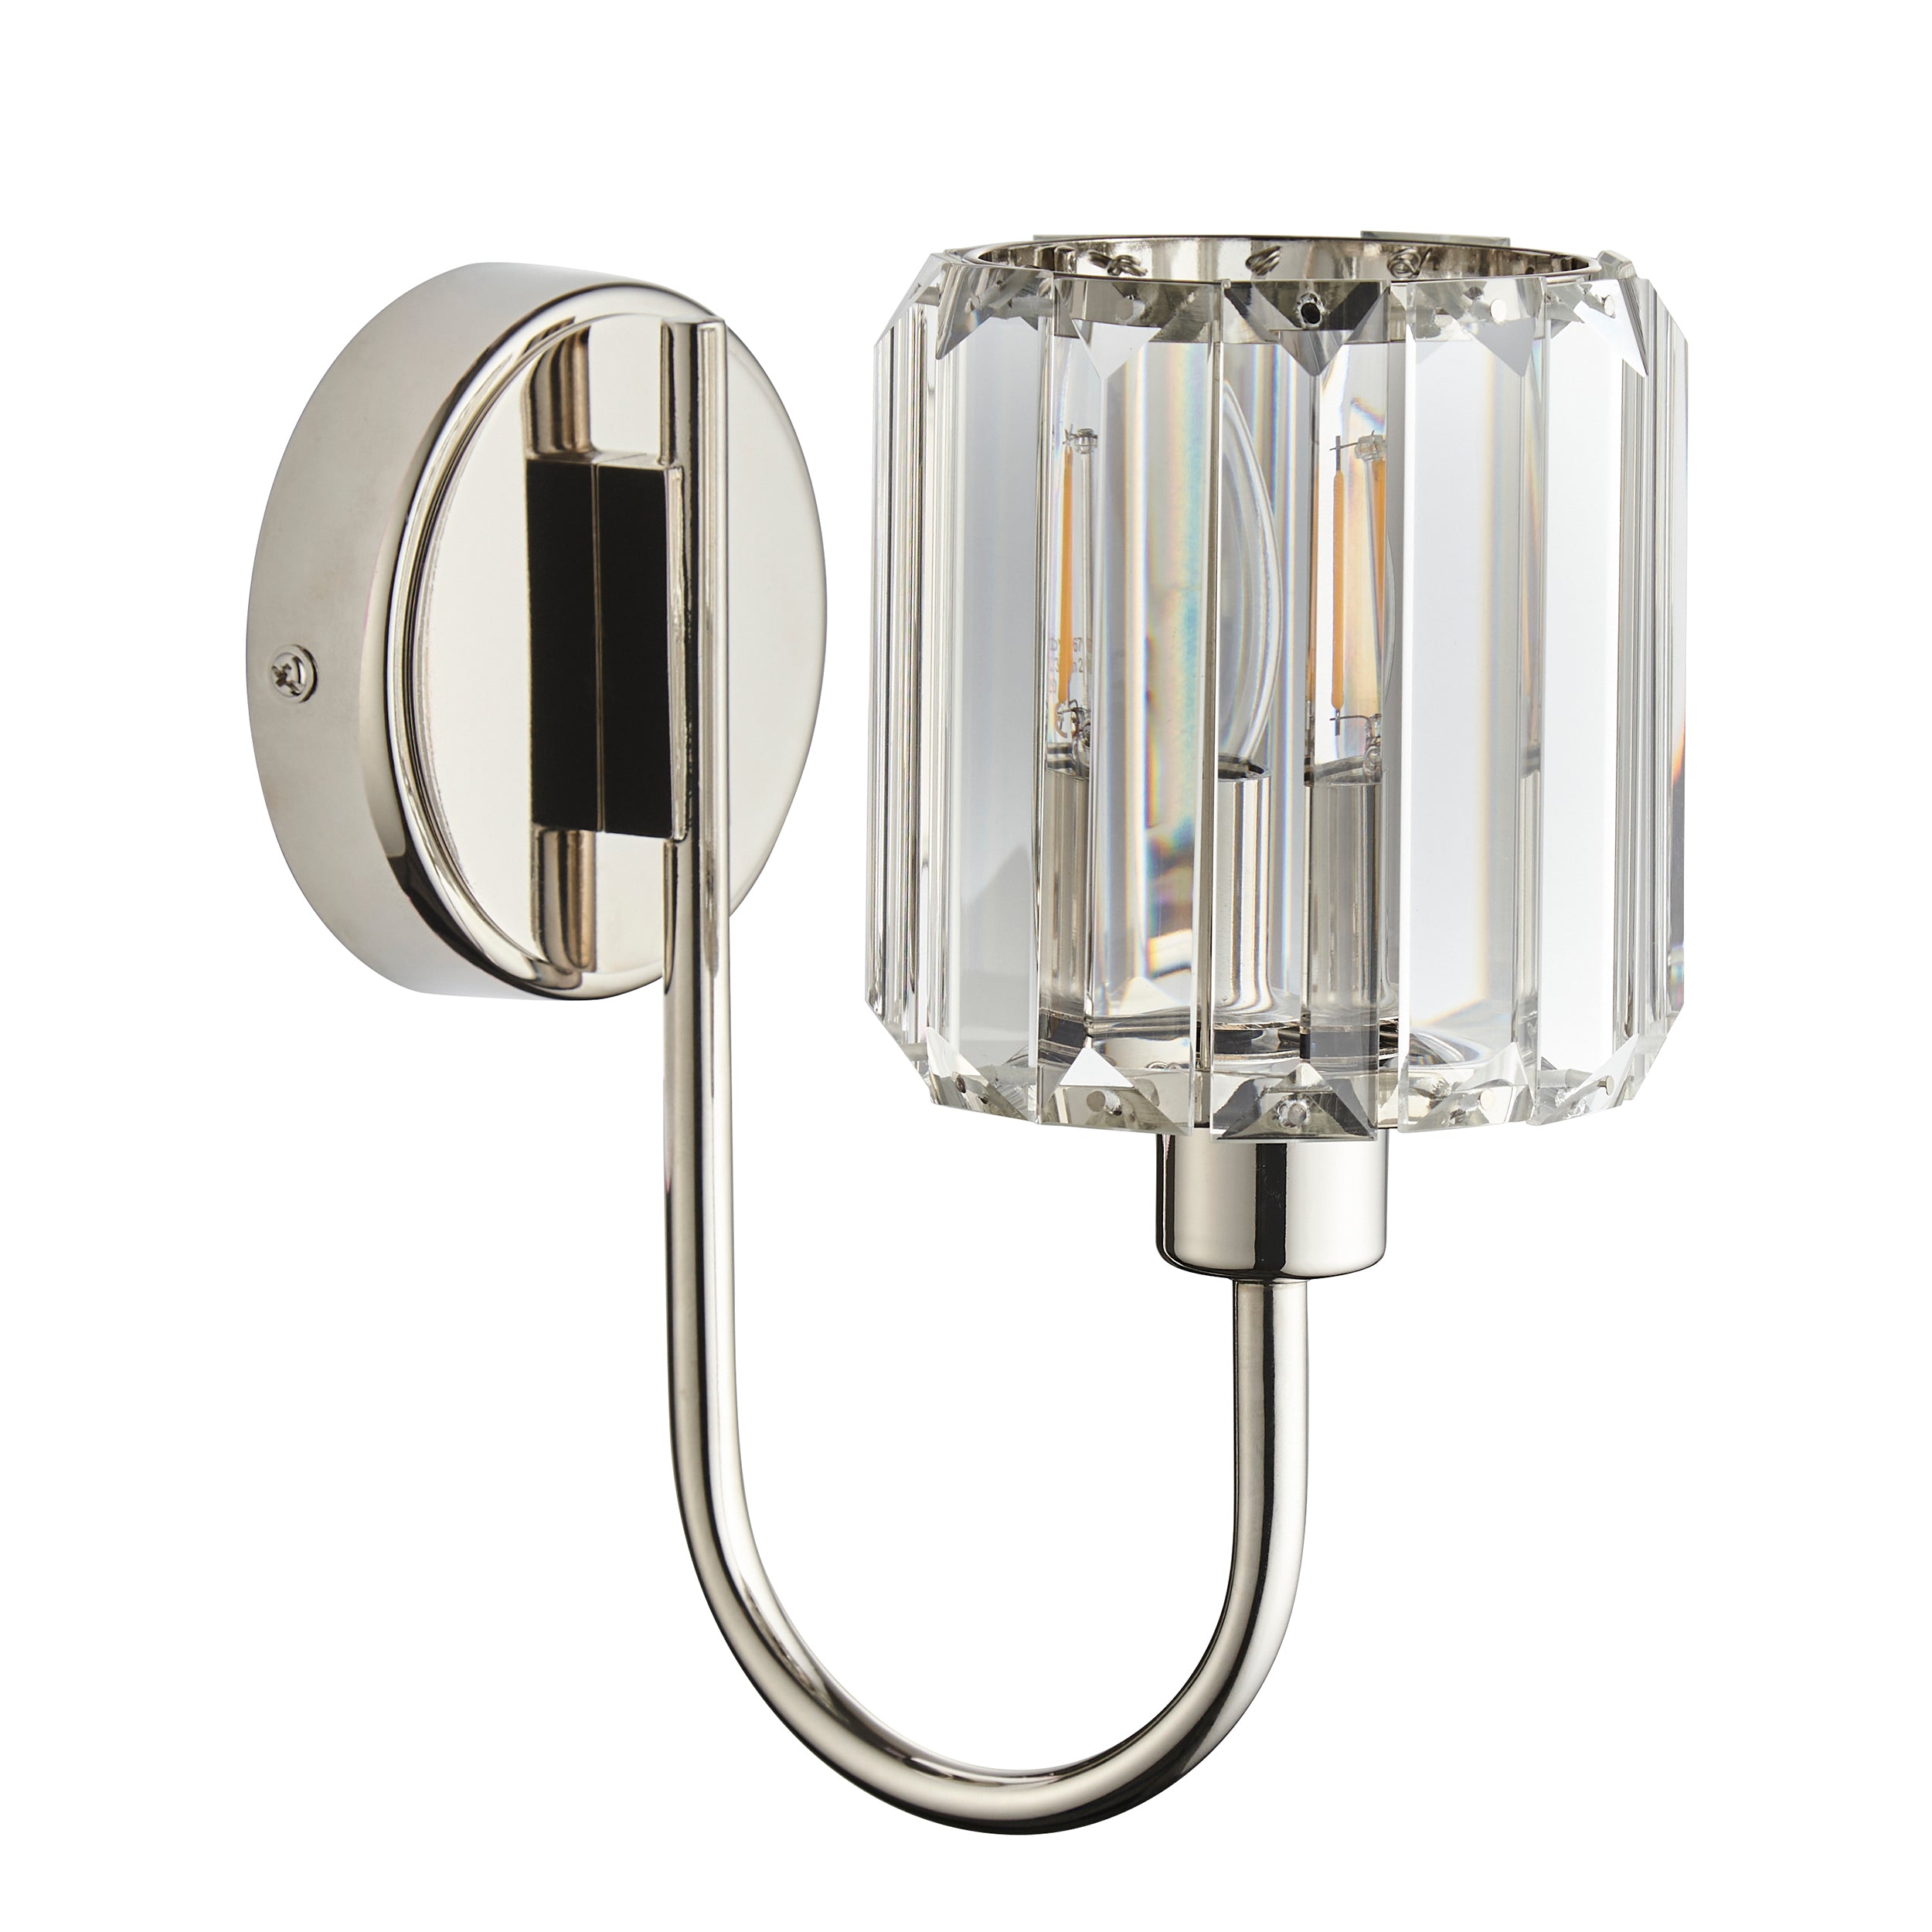 Berenice Sophisticated Bright Nickel and Faceted Glass Wall Light